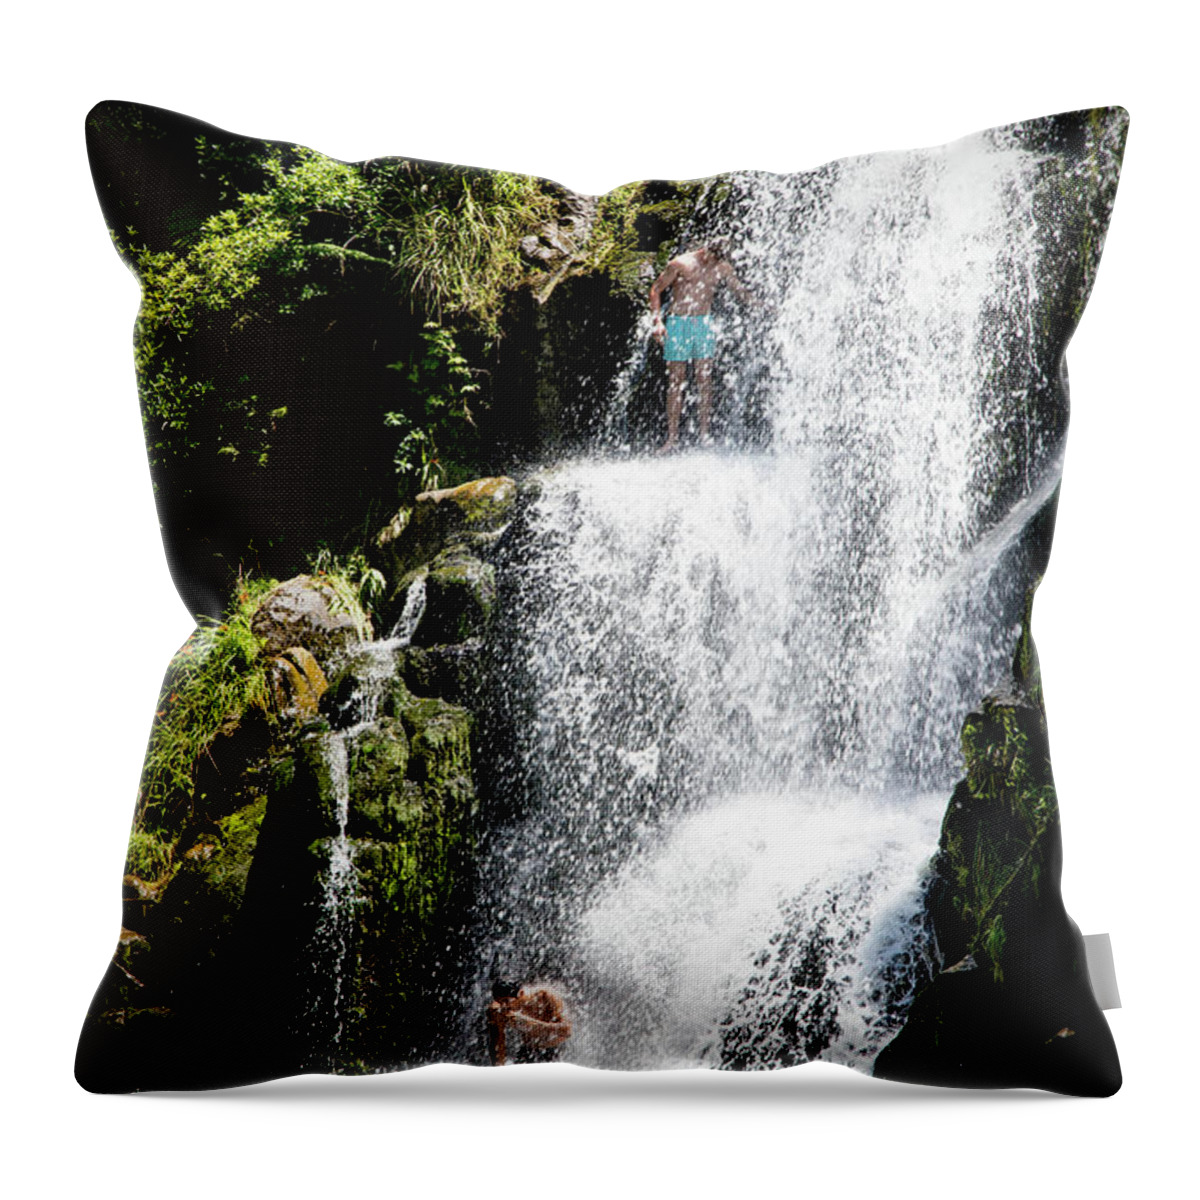 Waterfall Throw Pillow featuring the photograph Waterfall in New Zealand by Kathryn McBride